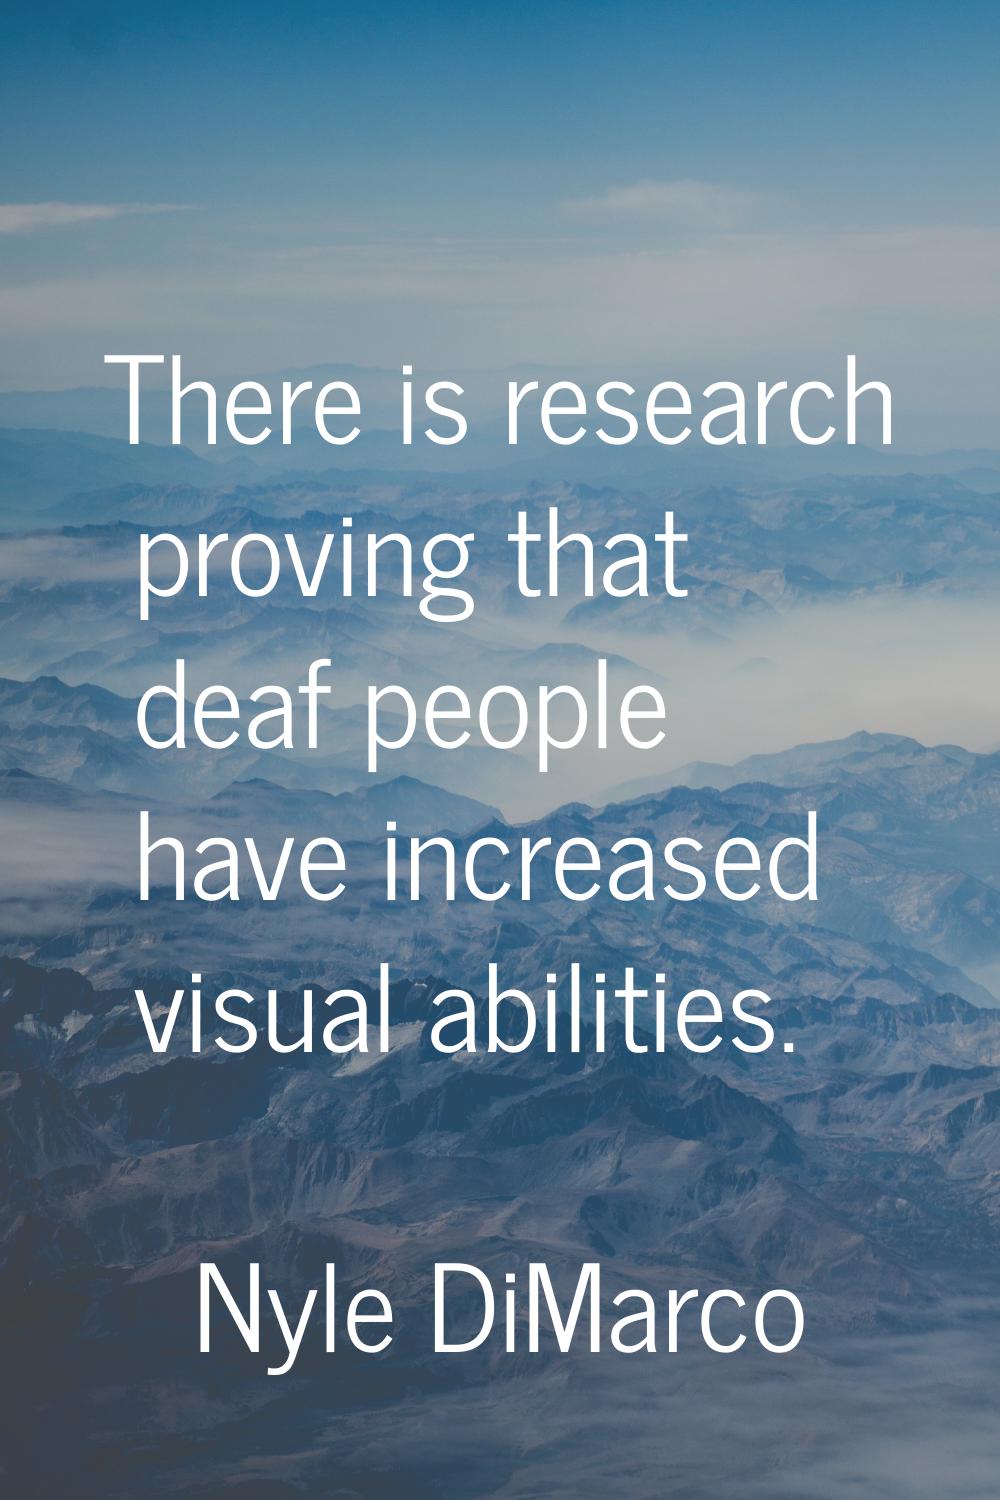 There is research proving that deaf people have increased visual abilities.